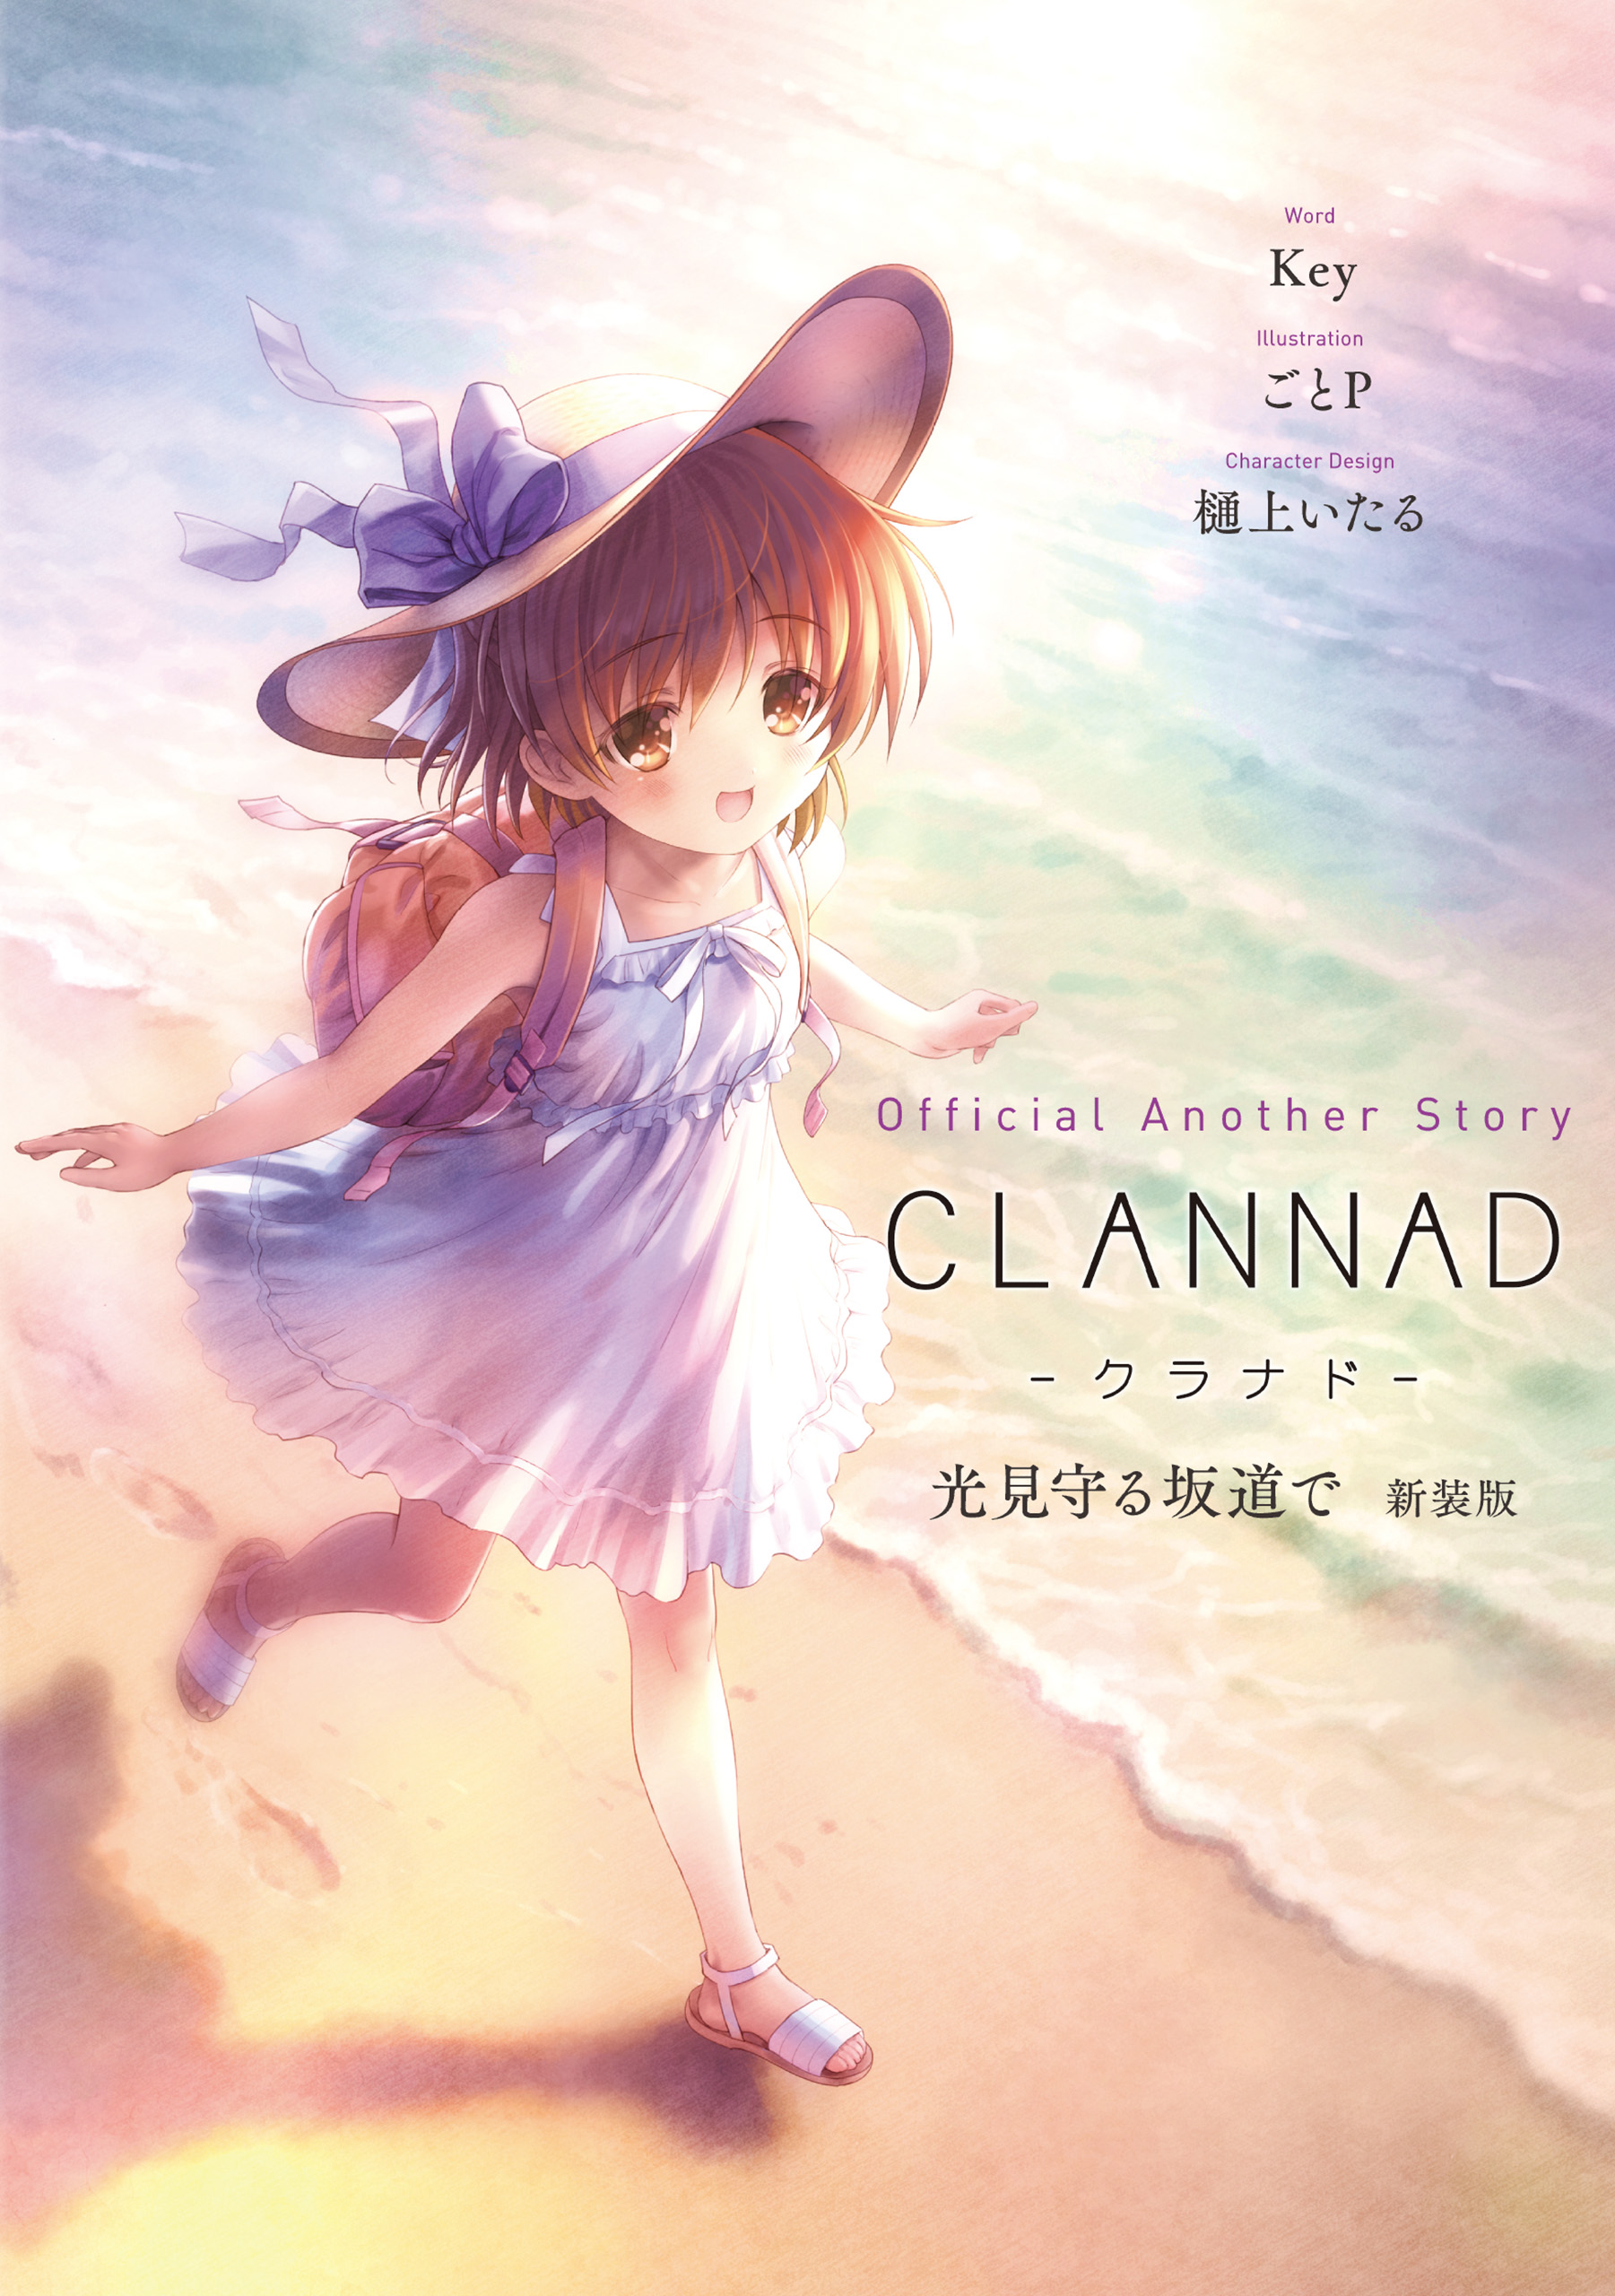 Official Another Story CLANNAD 光見守る坂道で 新装版 - Key/ごとP 